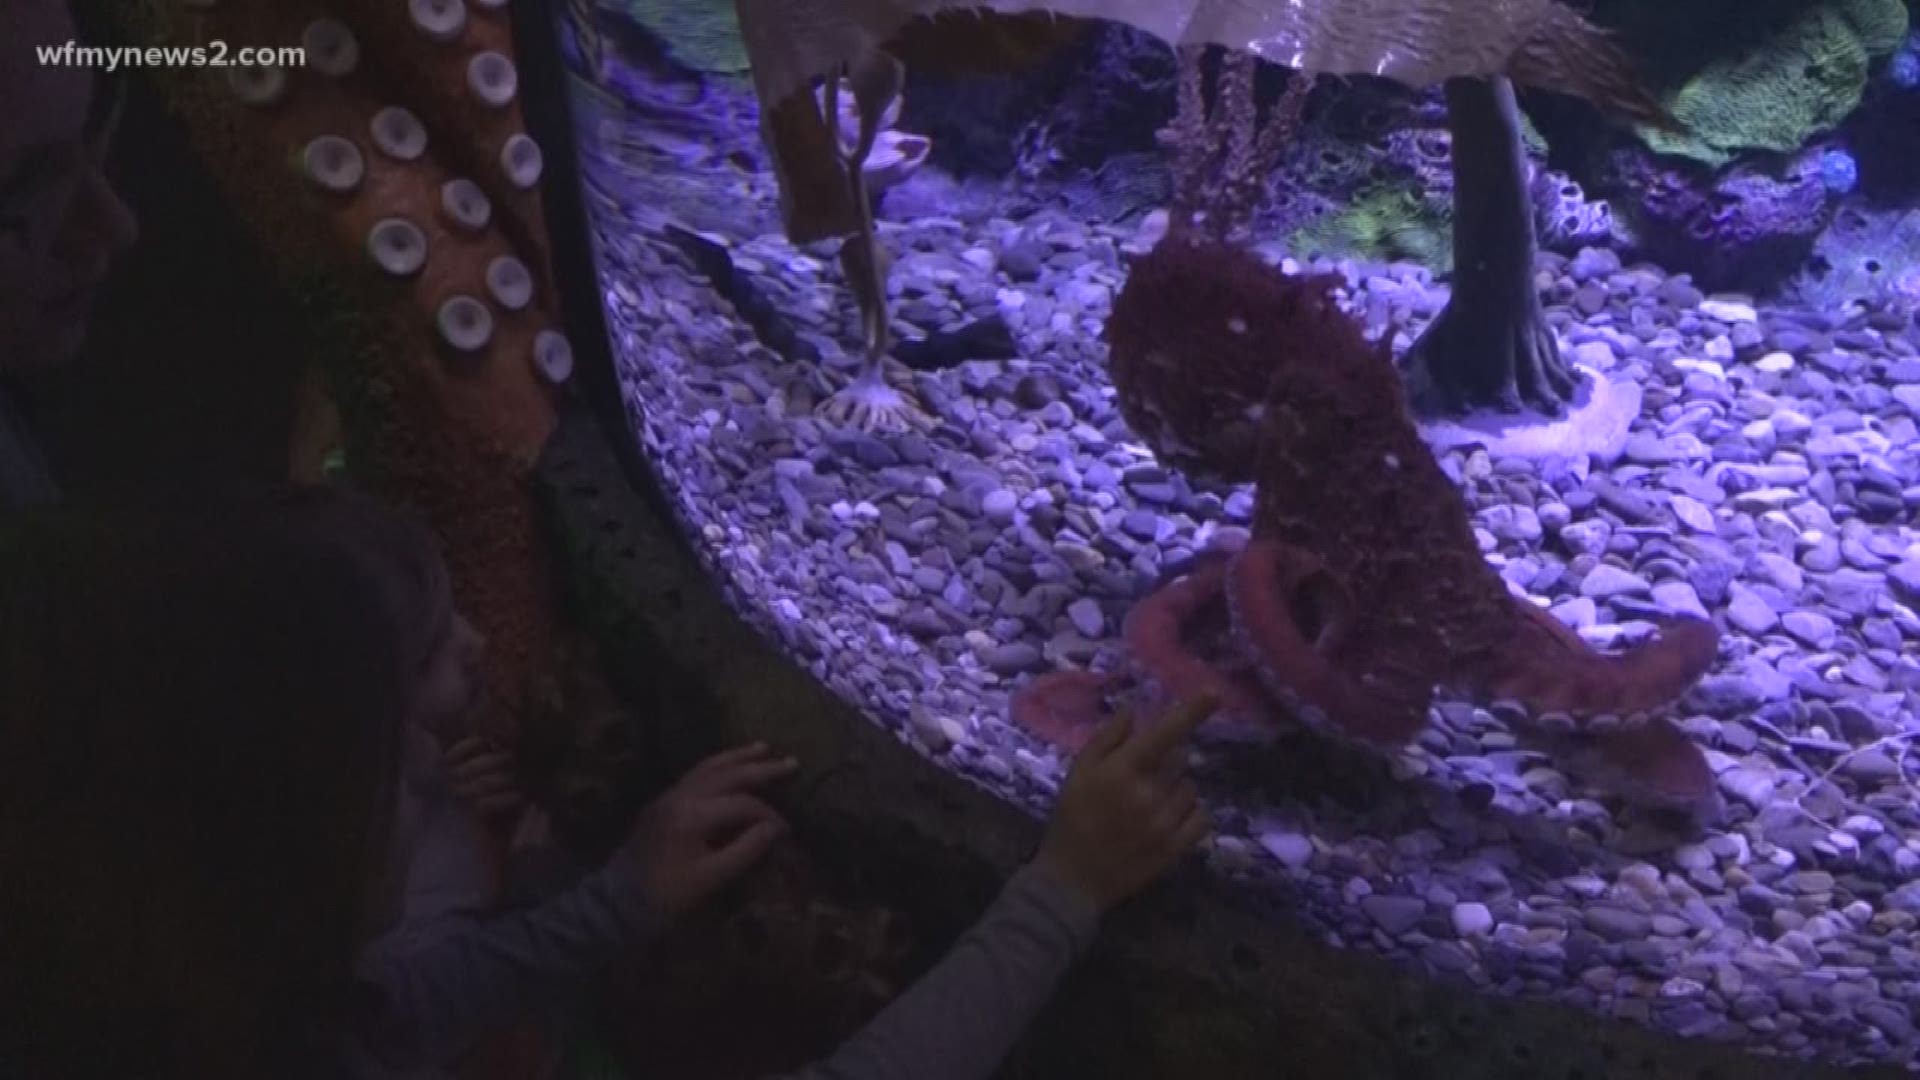 There's a new octopus for your family to check out!
The Greensboro Science Center now home to a new Giant Pacific Octopus.